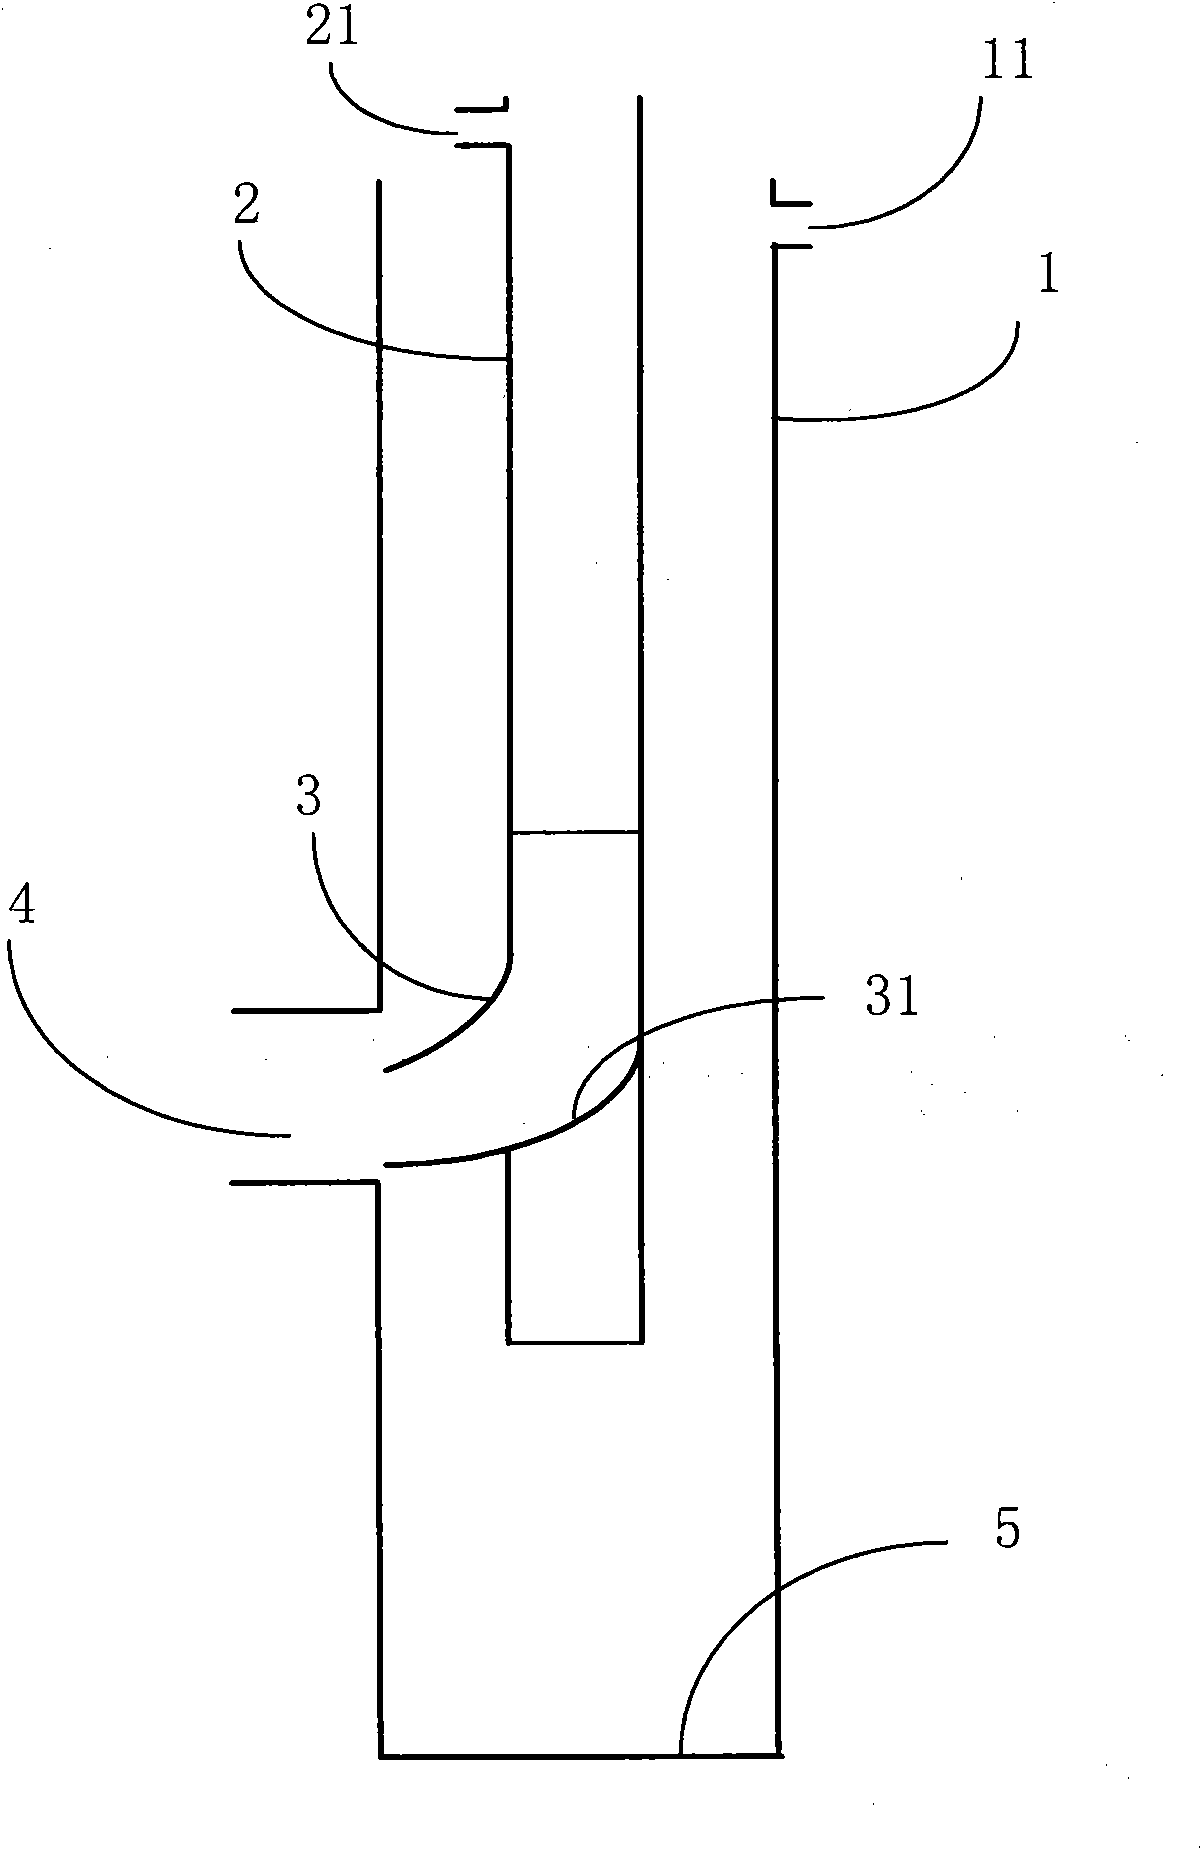 Auxiliary circulatory chip returning device of production vertical well when the coalbed methane well generates radial hydraulically injection